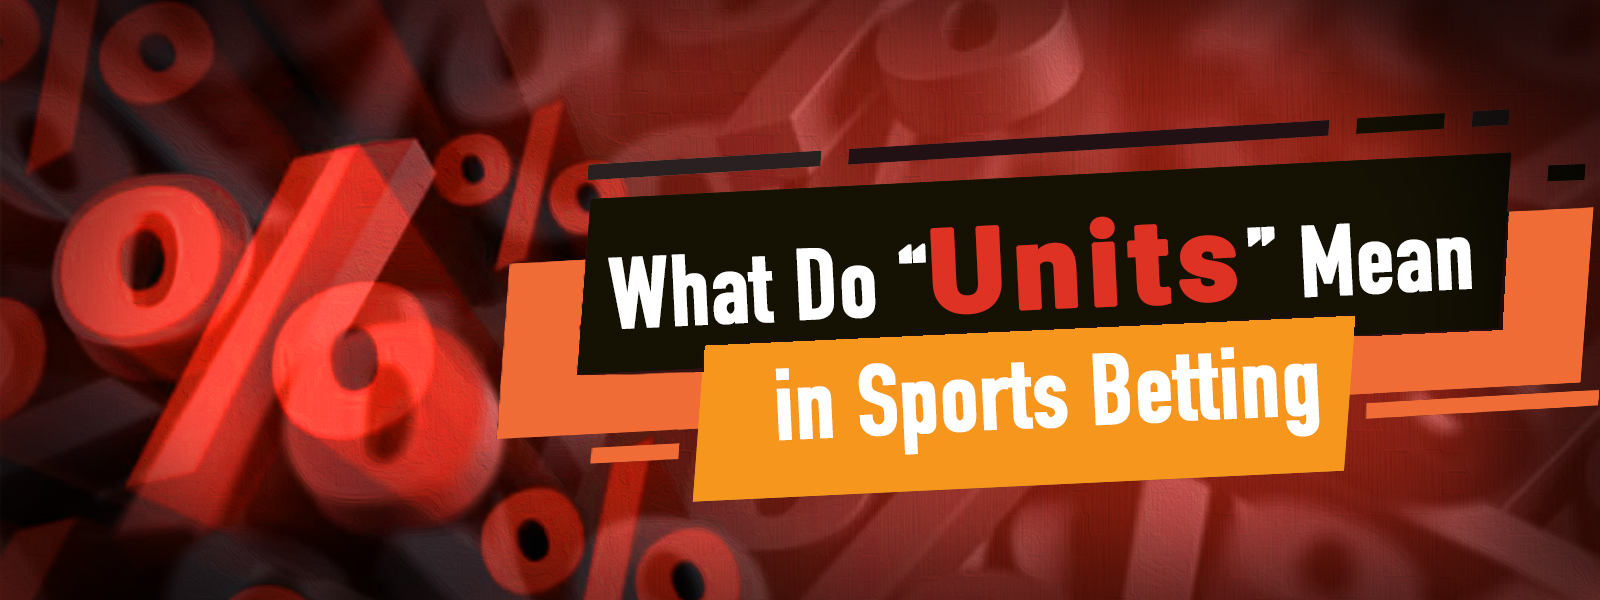 What Do “Units” Mean In Sports Betting